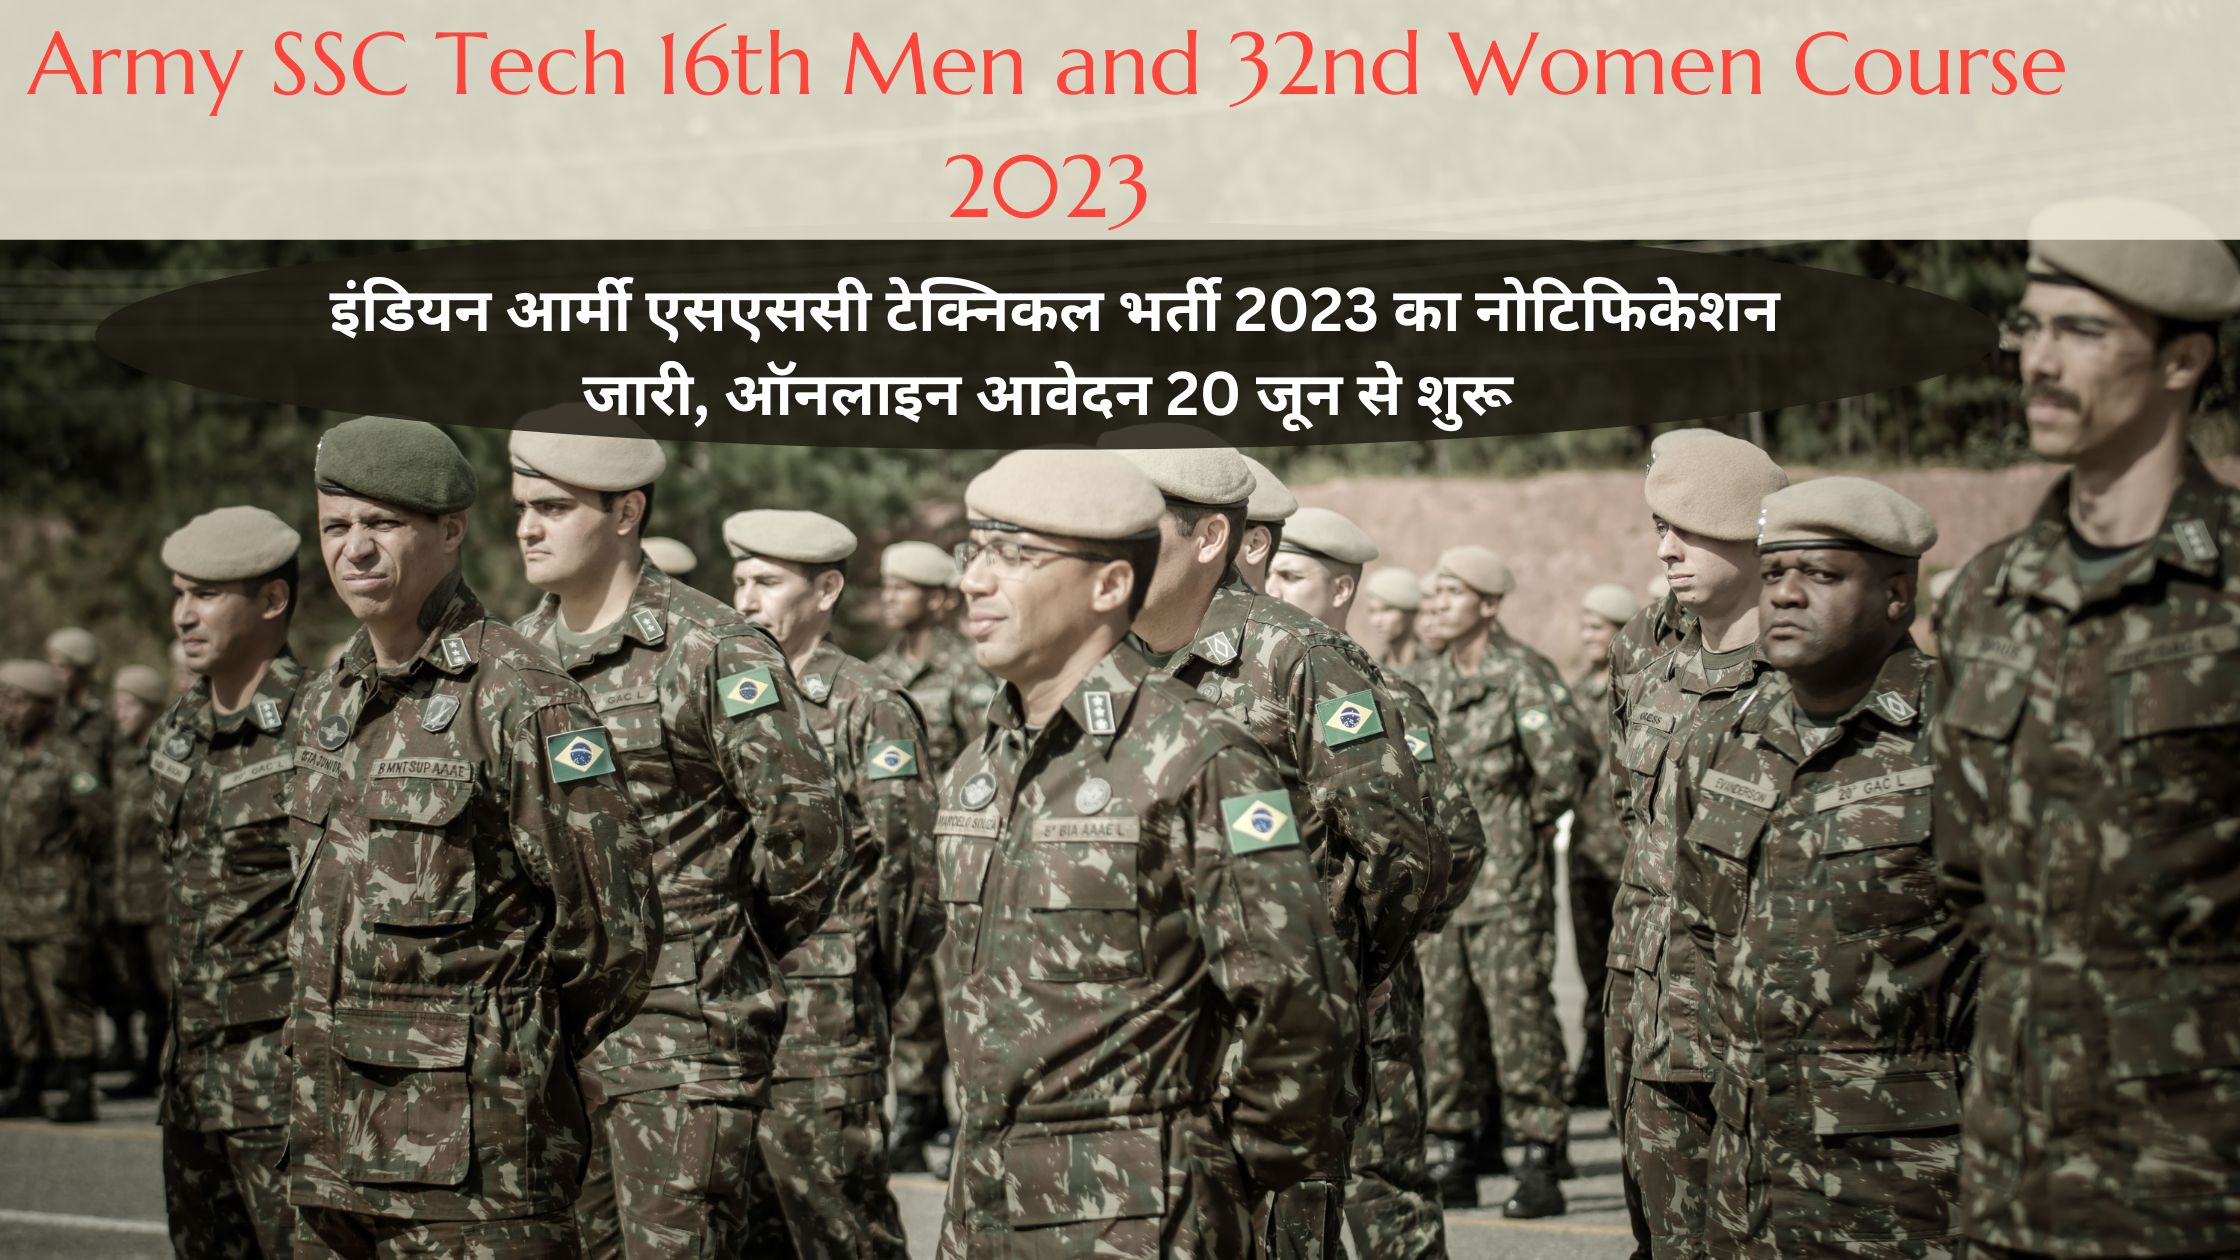 Army SSC Tech 16th Men and 32nd Women Course 2023 Apply Now